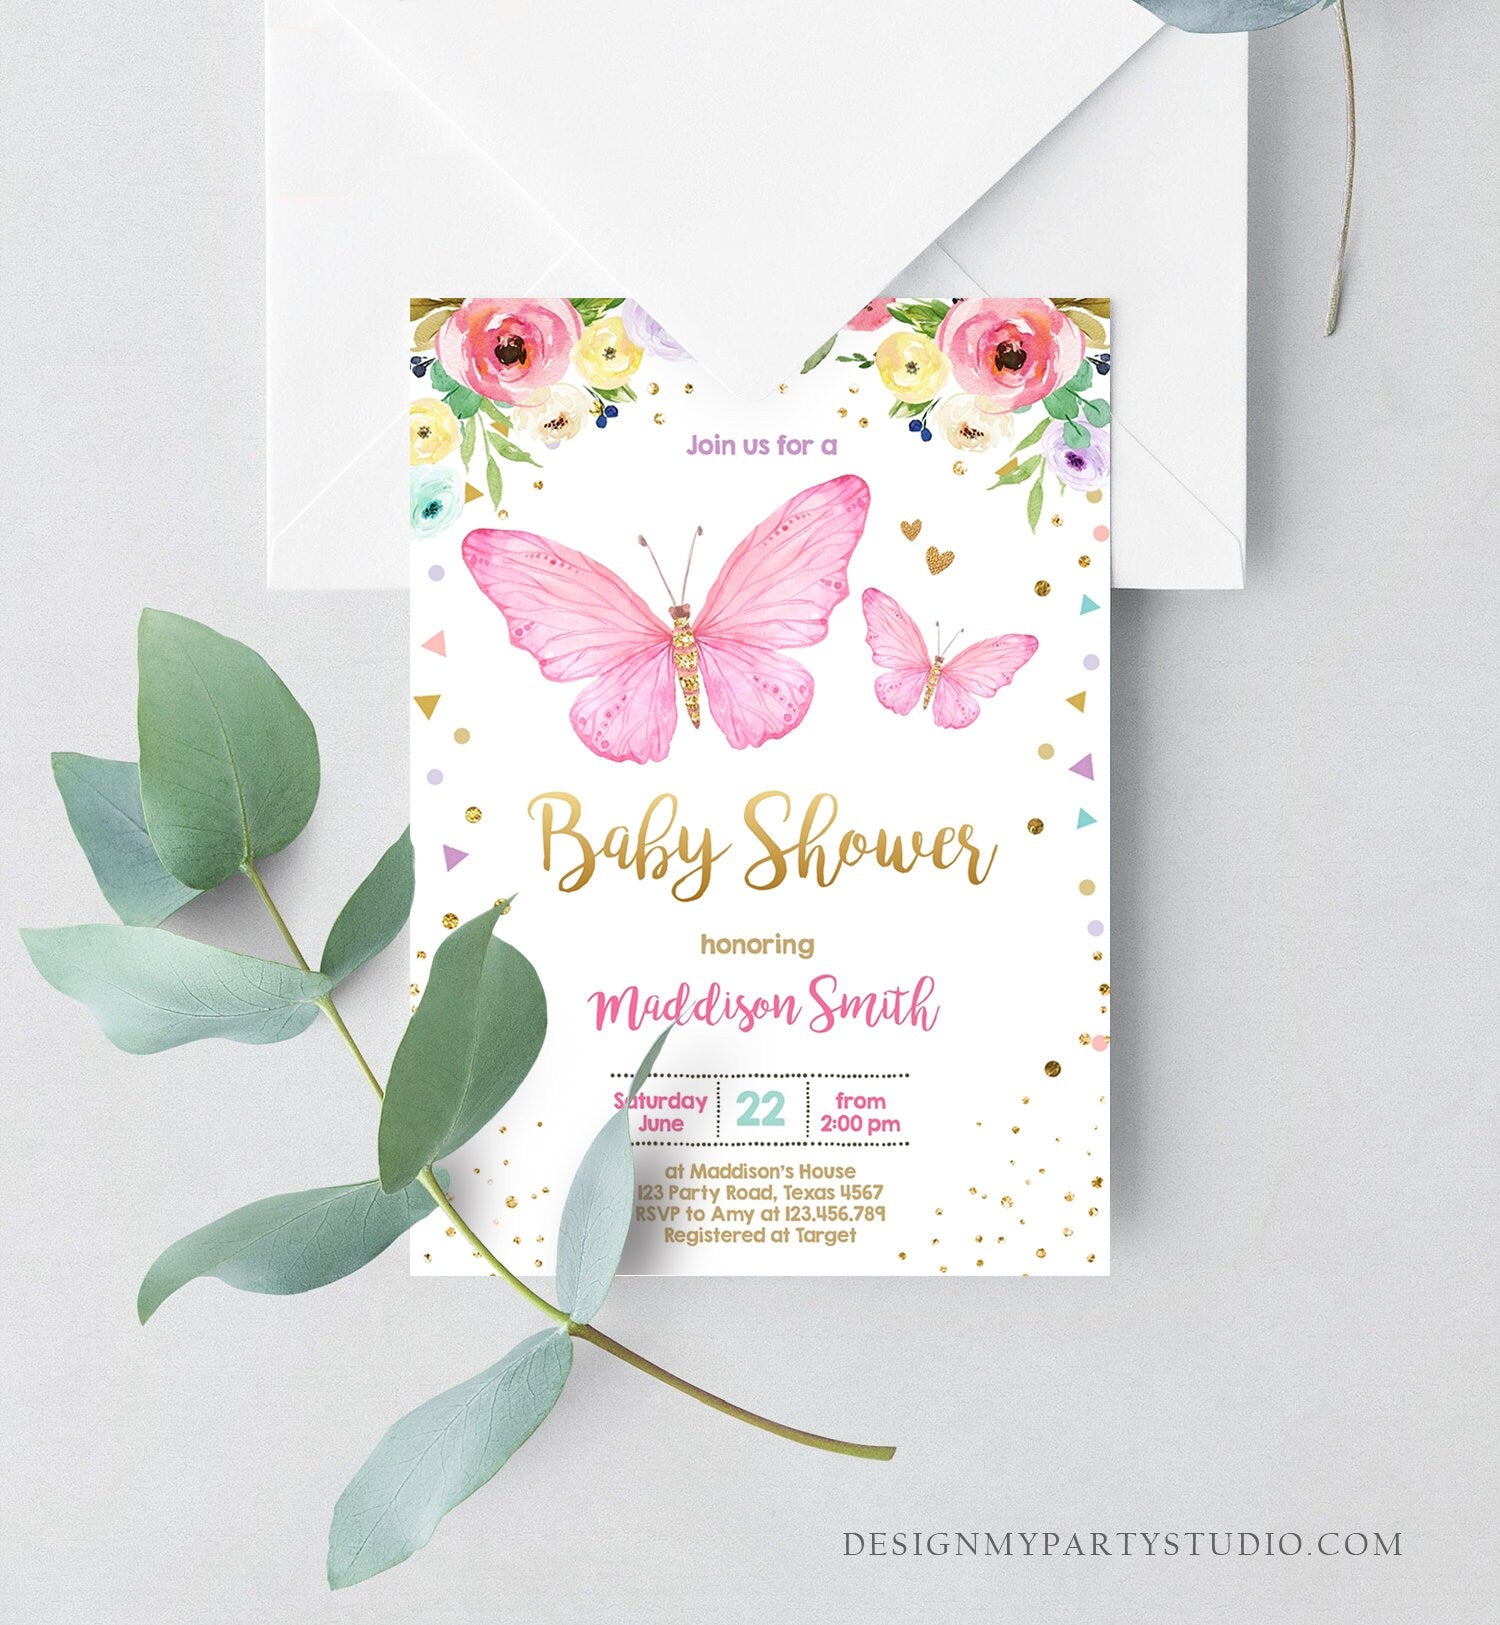 Editable Butterfly Baby Shower Invitation Butterfly Invitation Garden Floral Flowers Pink Gold Girl Download Printable Template Corjl 0162